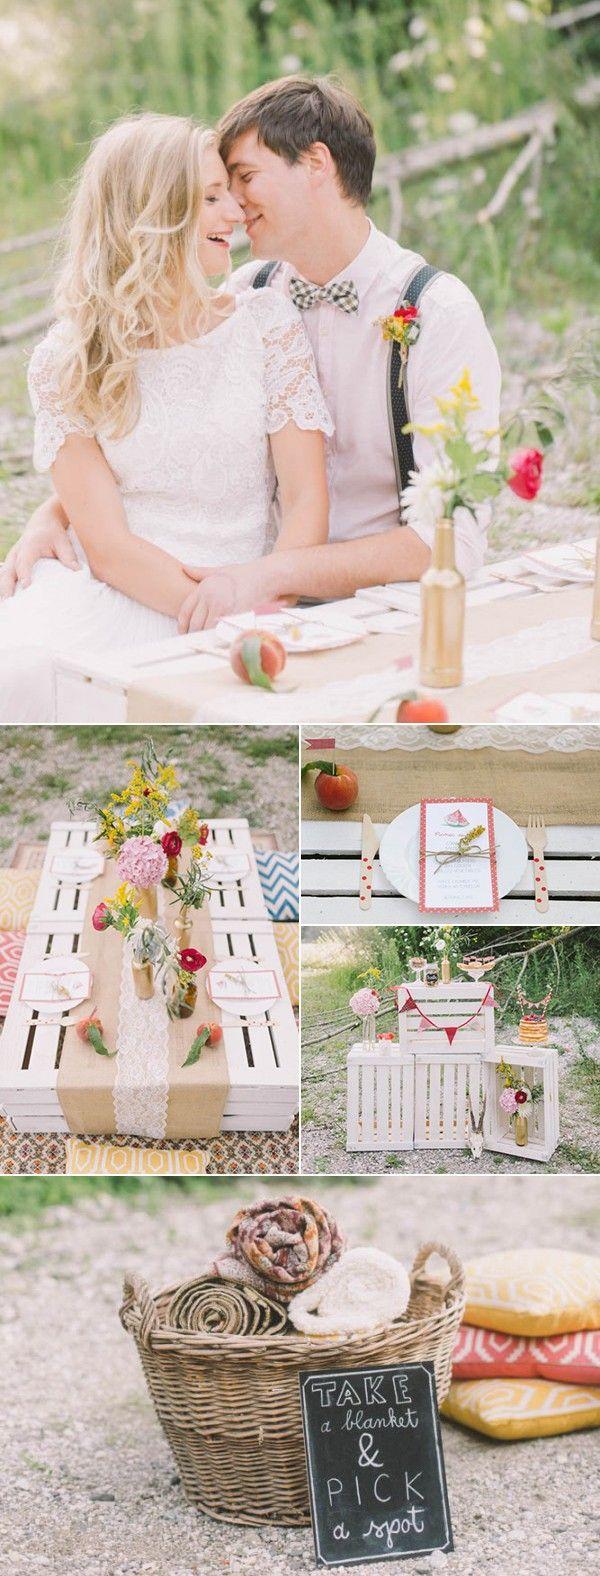 Hochzeit - 5 Of Our Favorite Picnic Weddings To Inspire Your Summer Soirée